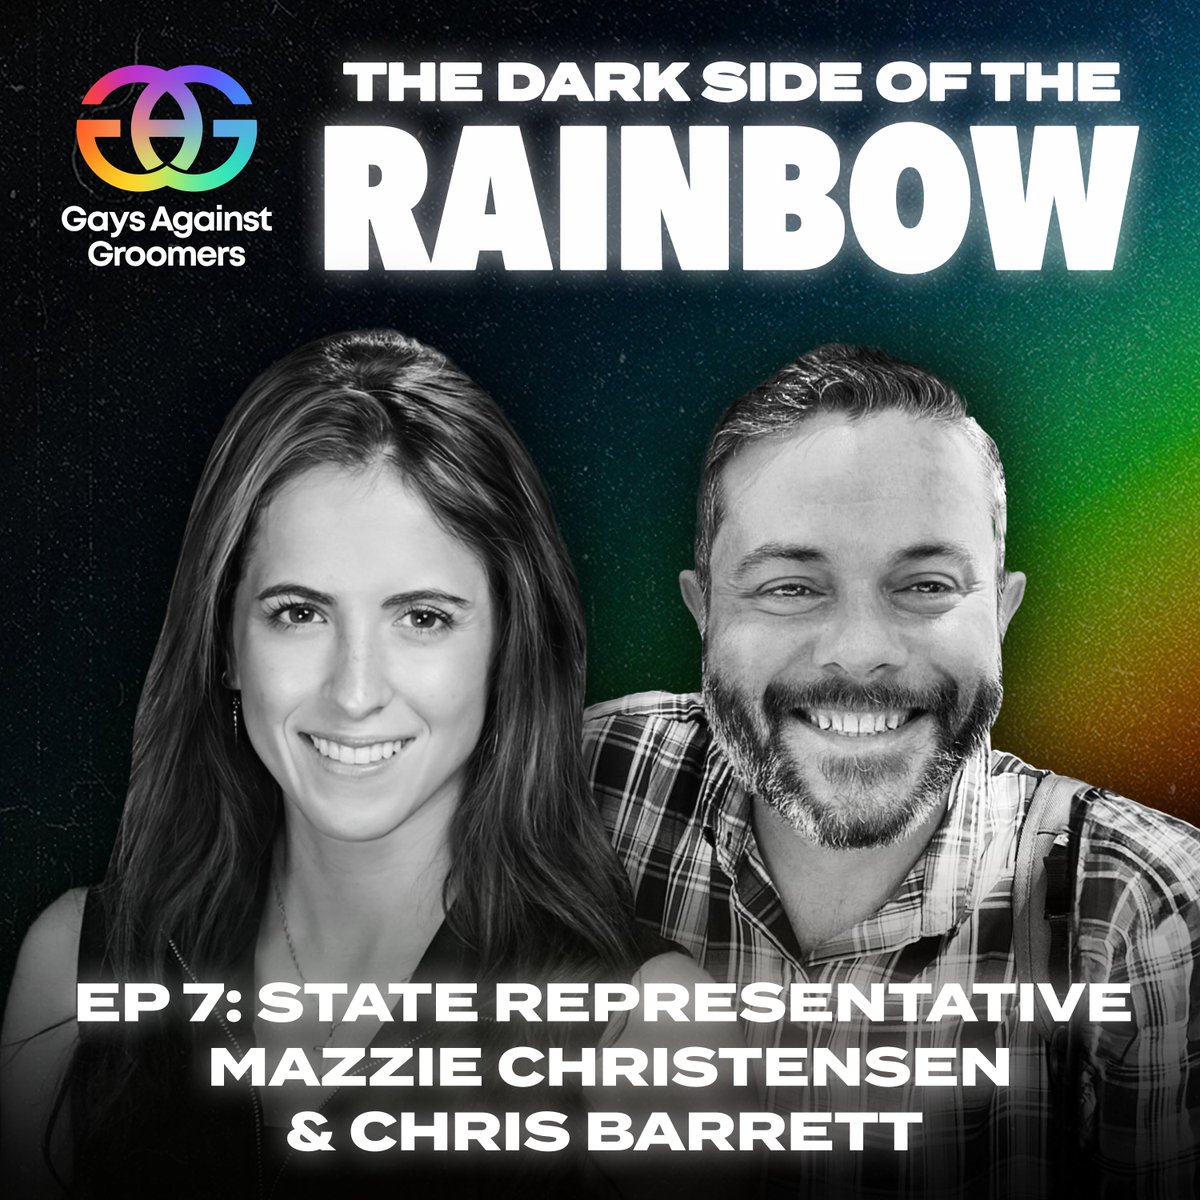 🔥 OUT NOW: Episode 7 of our podcast, The Dark Side of the Rainbow | The Fight to Ban All Age Drag Shows with State Rep @christmazzie and @GAG_Missouri co-chapter leader Chris Barrett @midwesthomo77. This episode, hosted by @RobertMWallace, presents a hard-hitting analysis of…